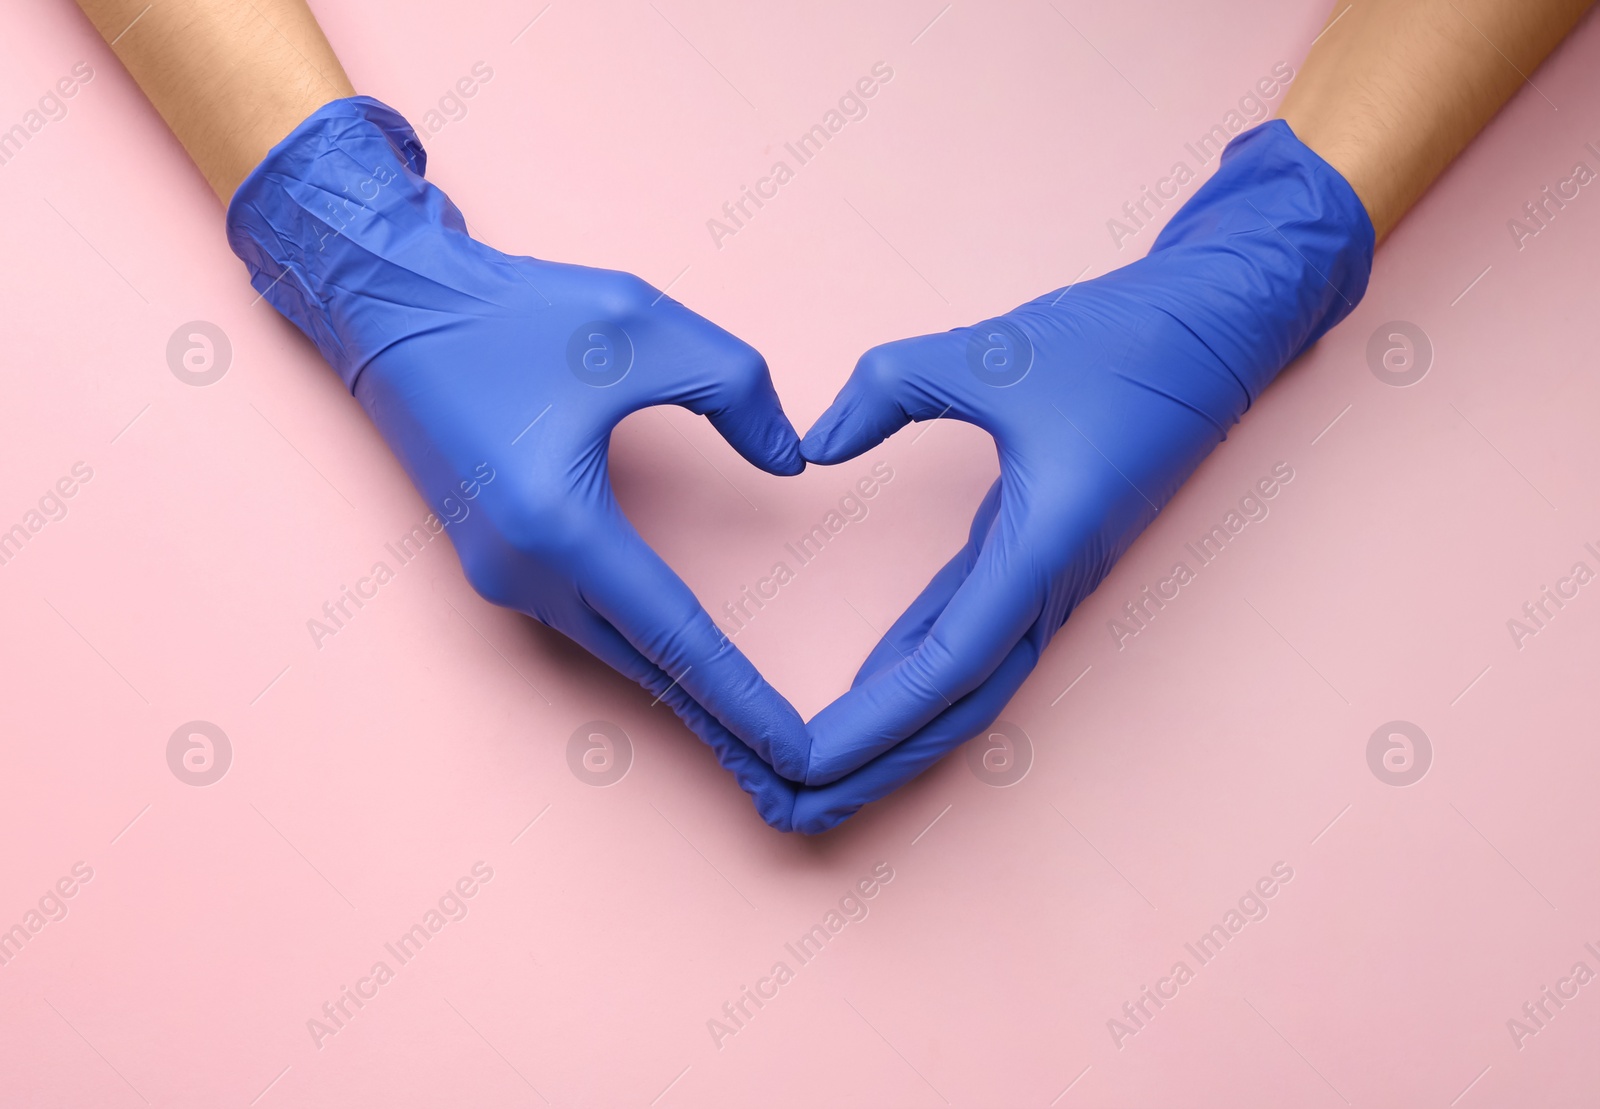 Photo of Person in medical gloves showing heart gesture against pink background, closeup of hands